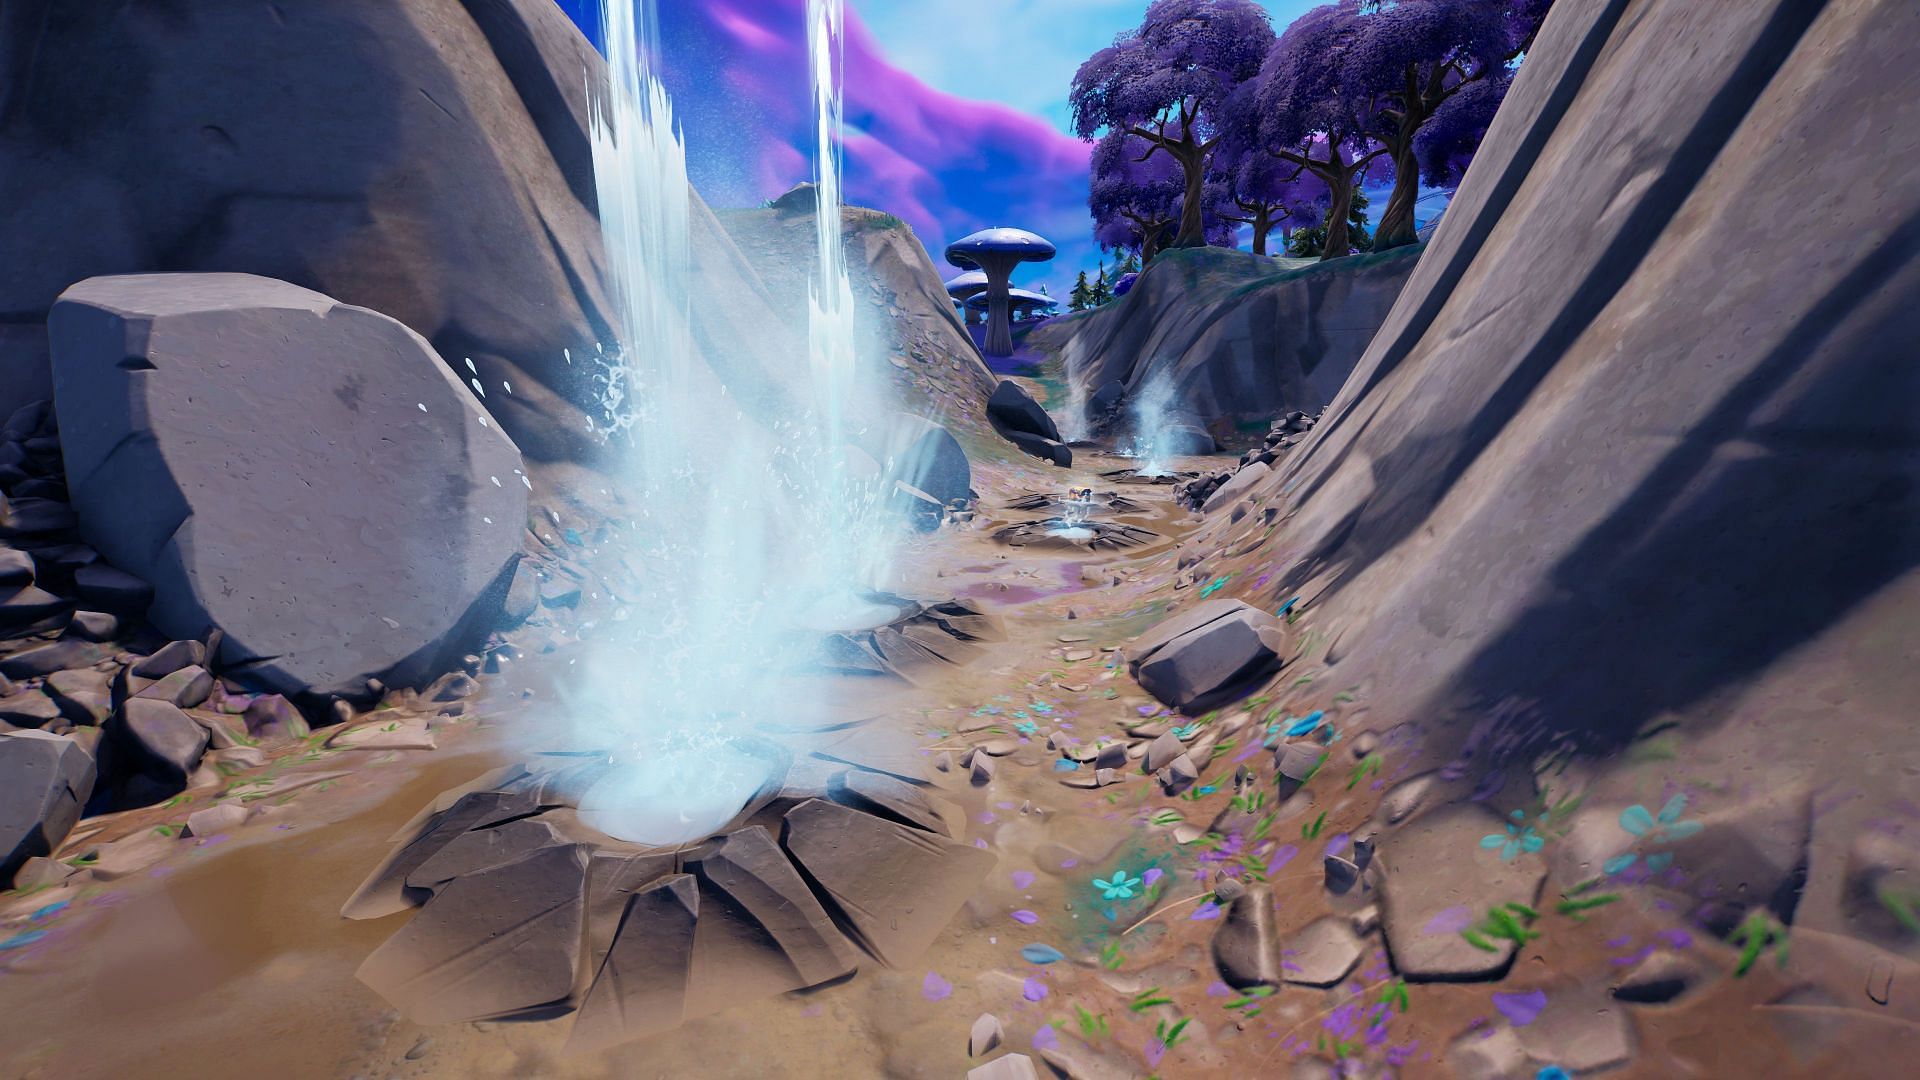 Fortnite geysers can be found in several spots on the island (Image via Epic Games)